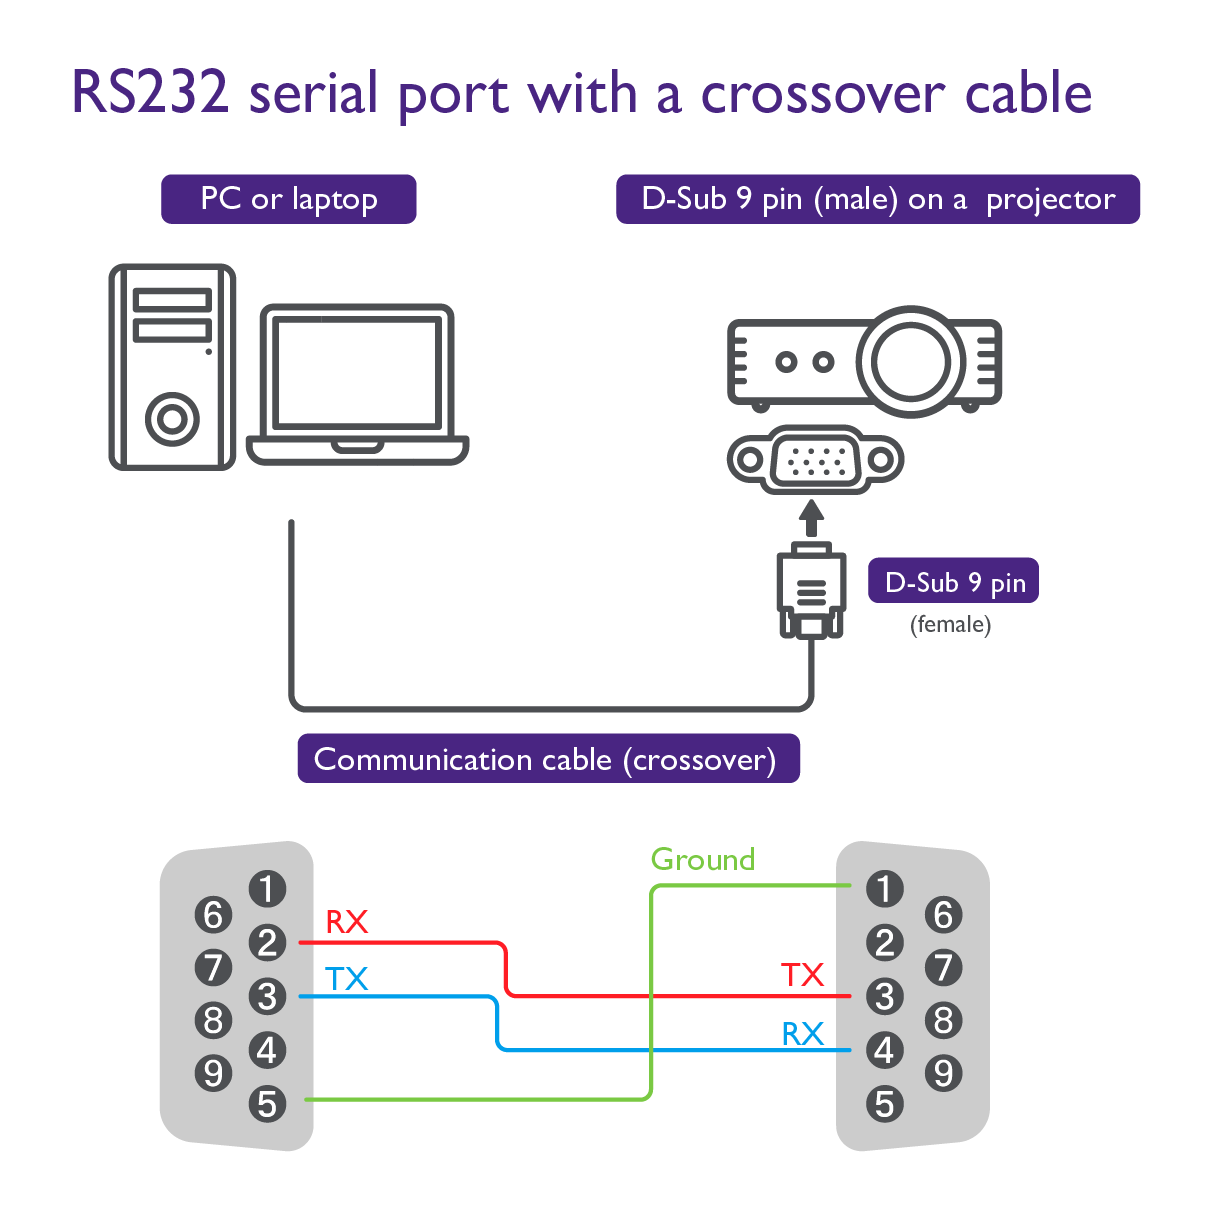 The picture shows RS232 serial port with a crossover cable.